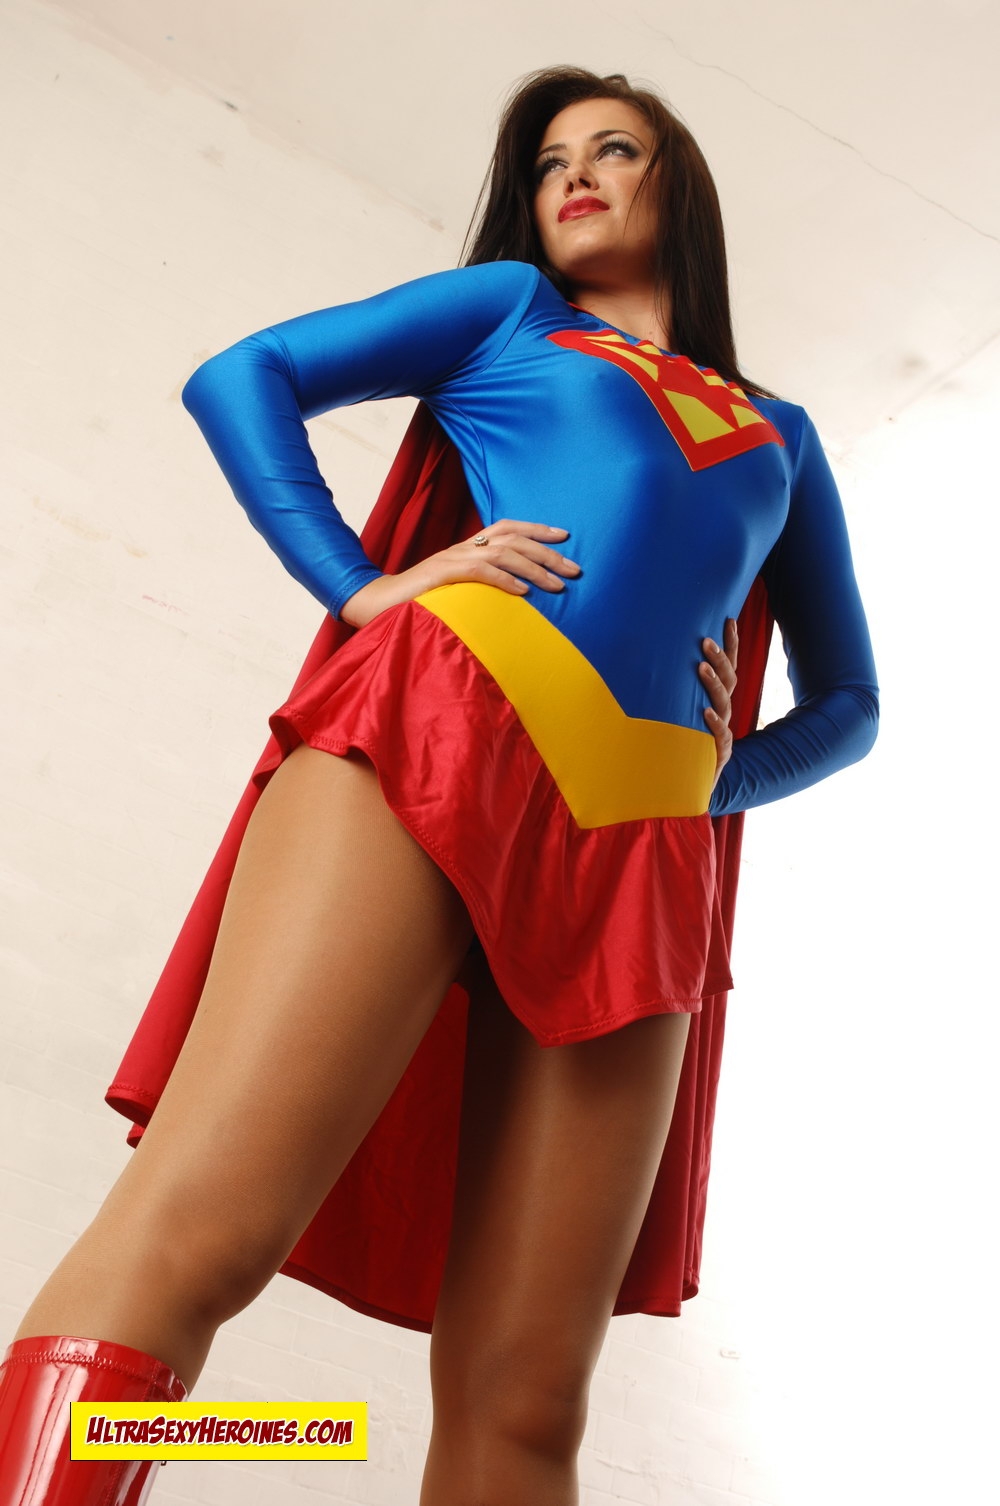 [UltraSexyHeroines] Super Heroine Cosplay Nude - Holly 72